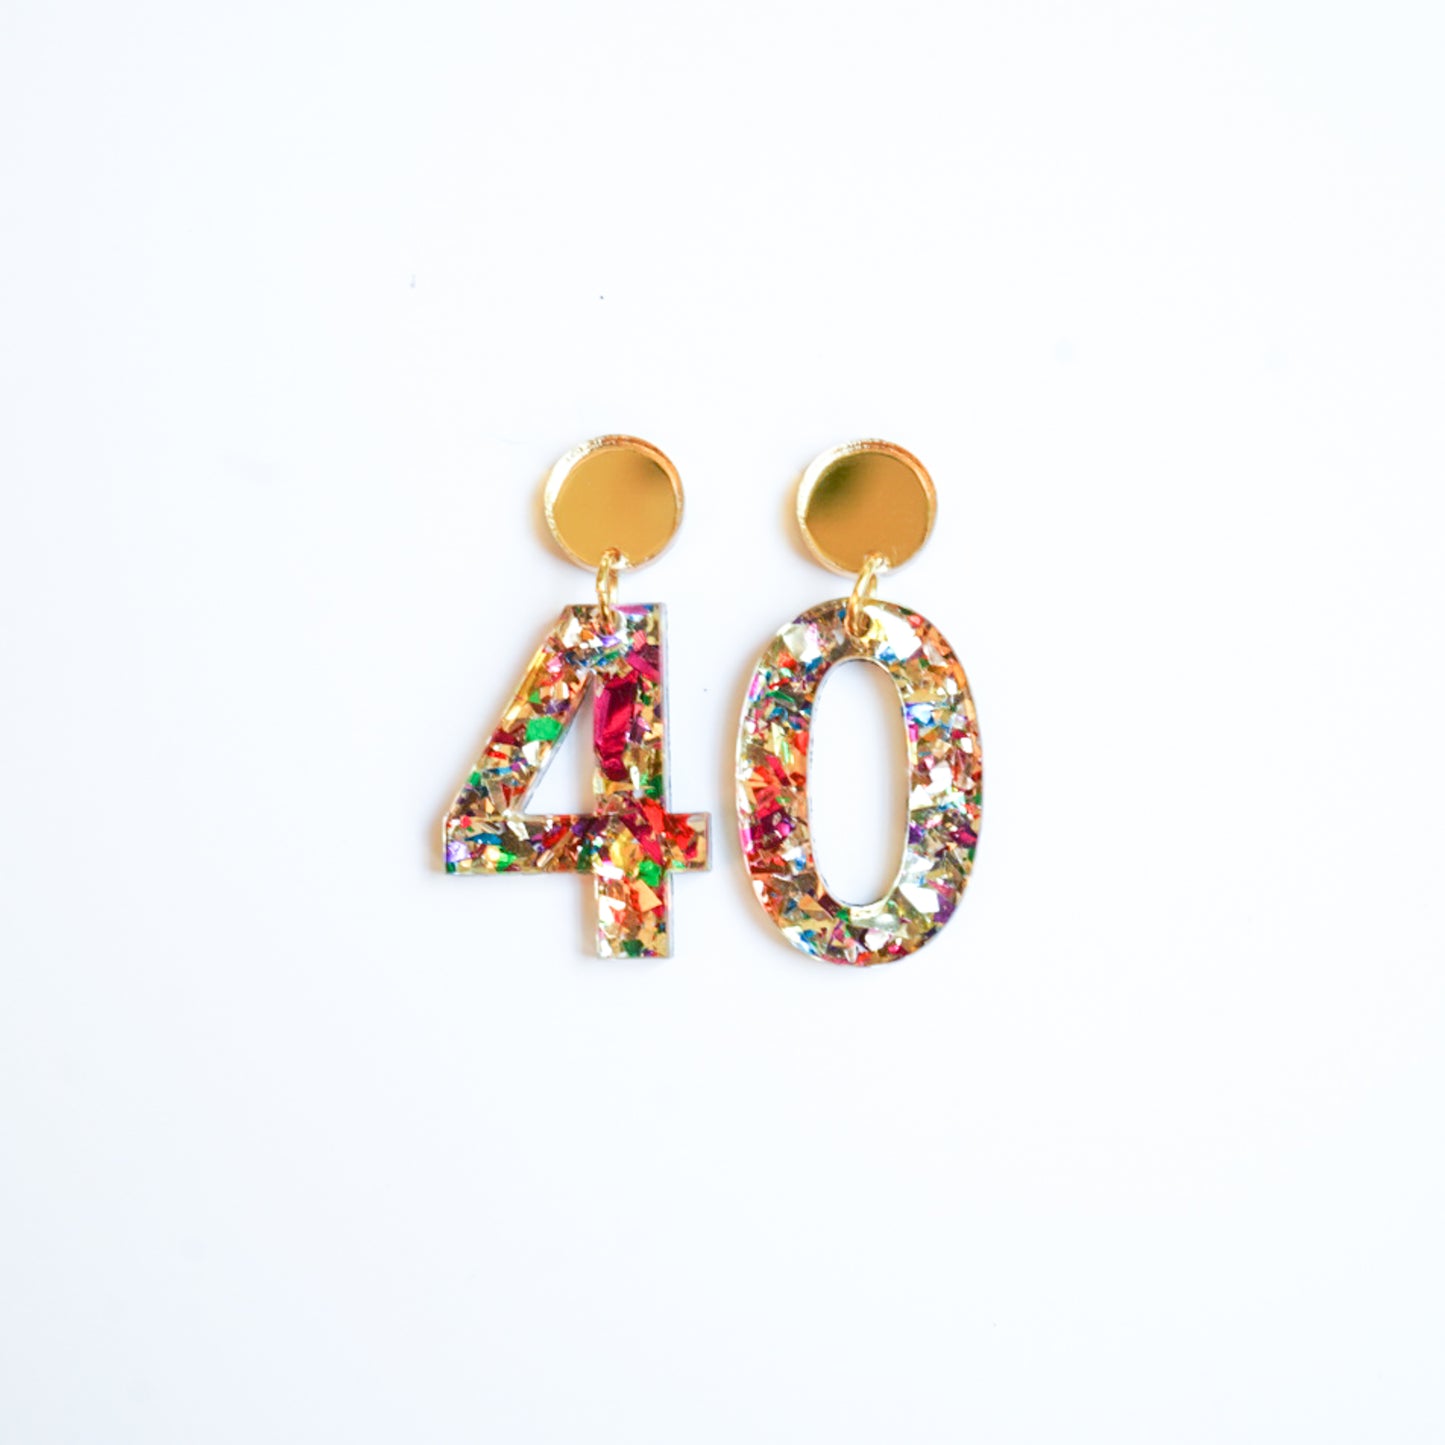 It’s My Party Birthday Earrings - Small